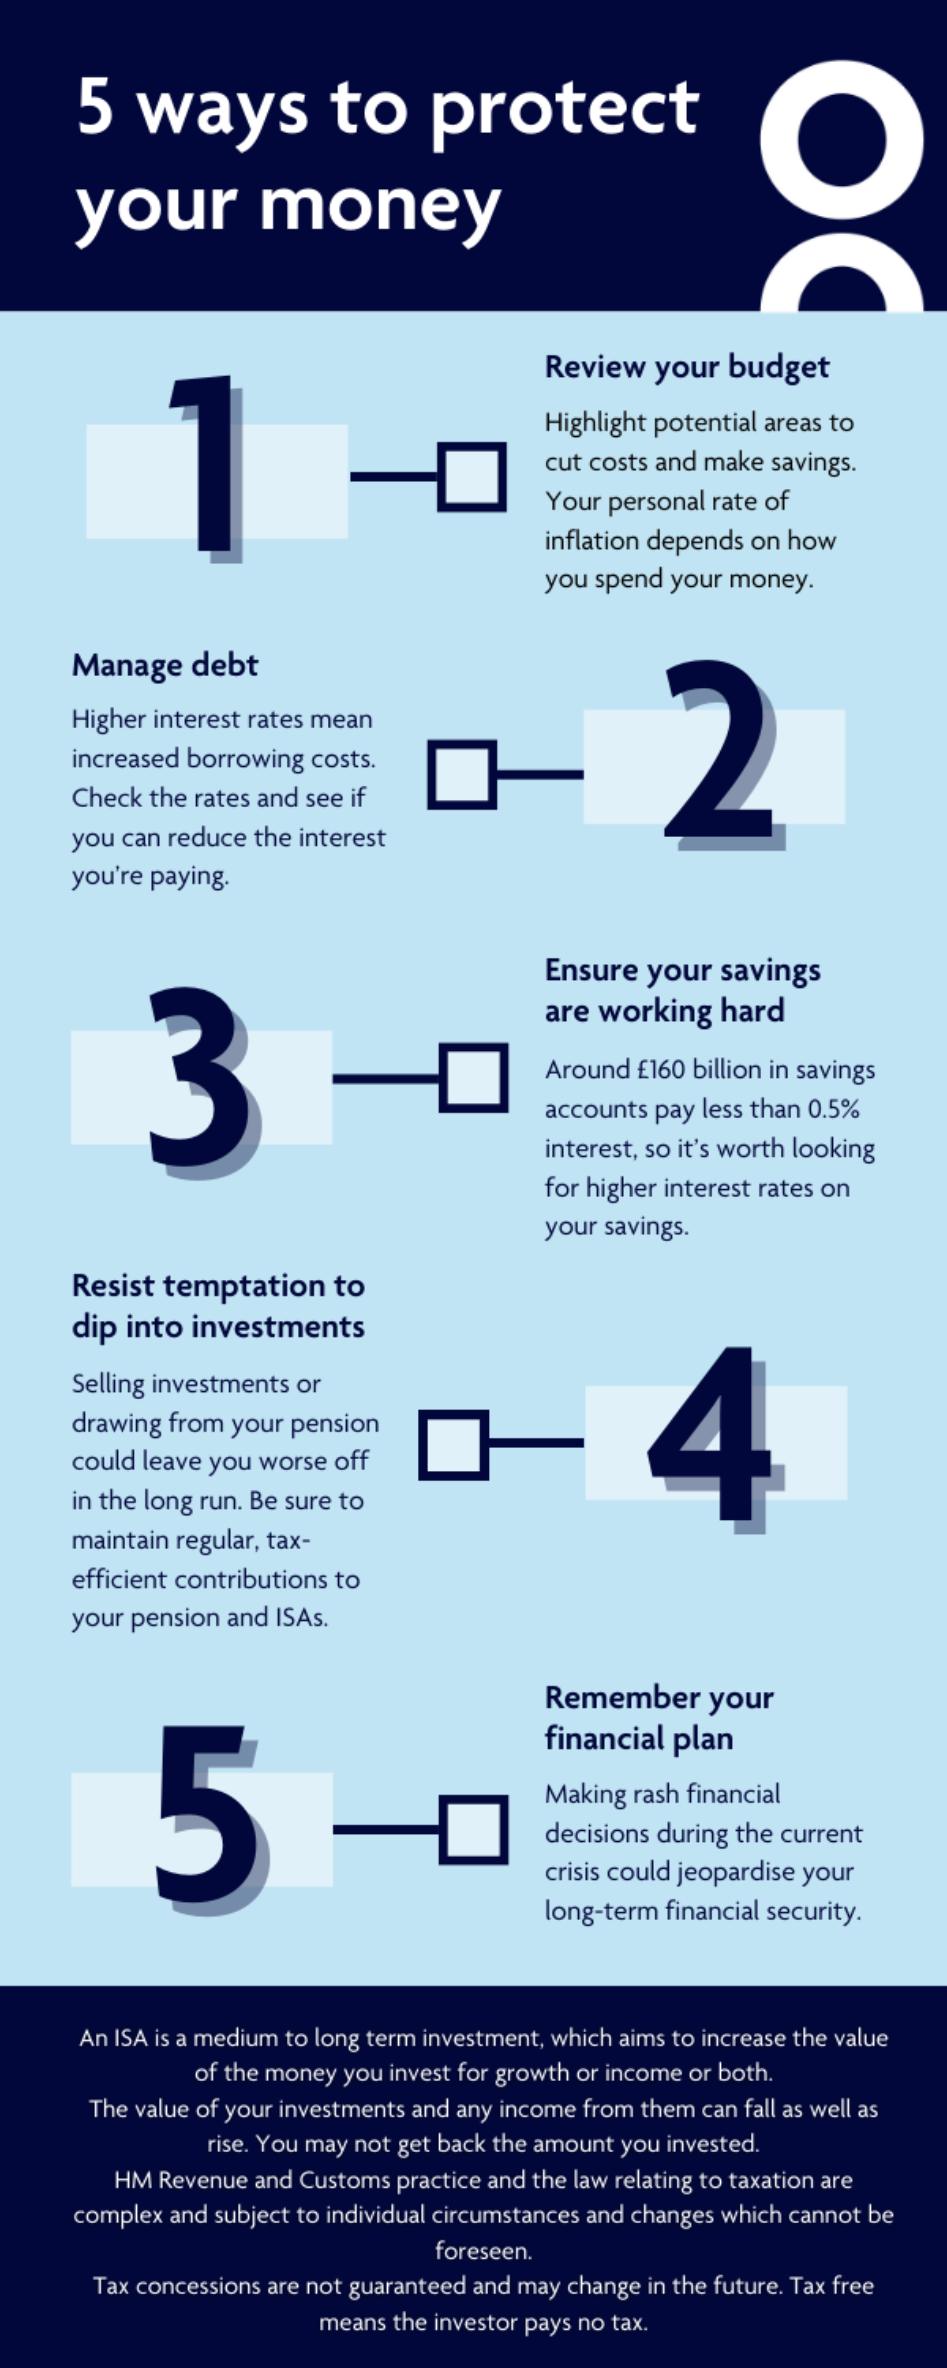 5-ways-to-protect-your-money.png